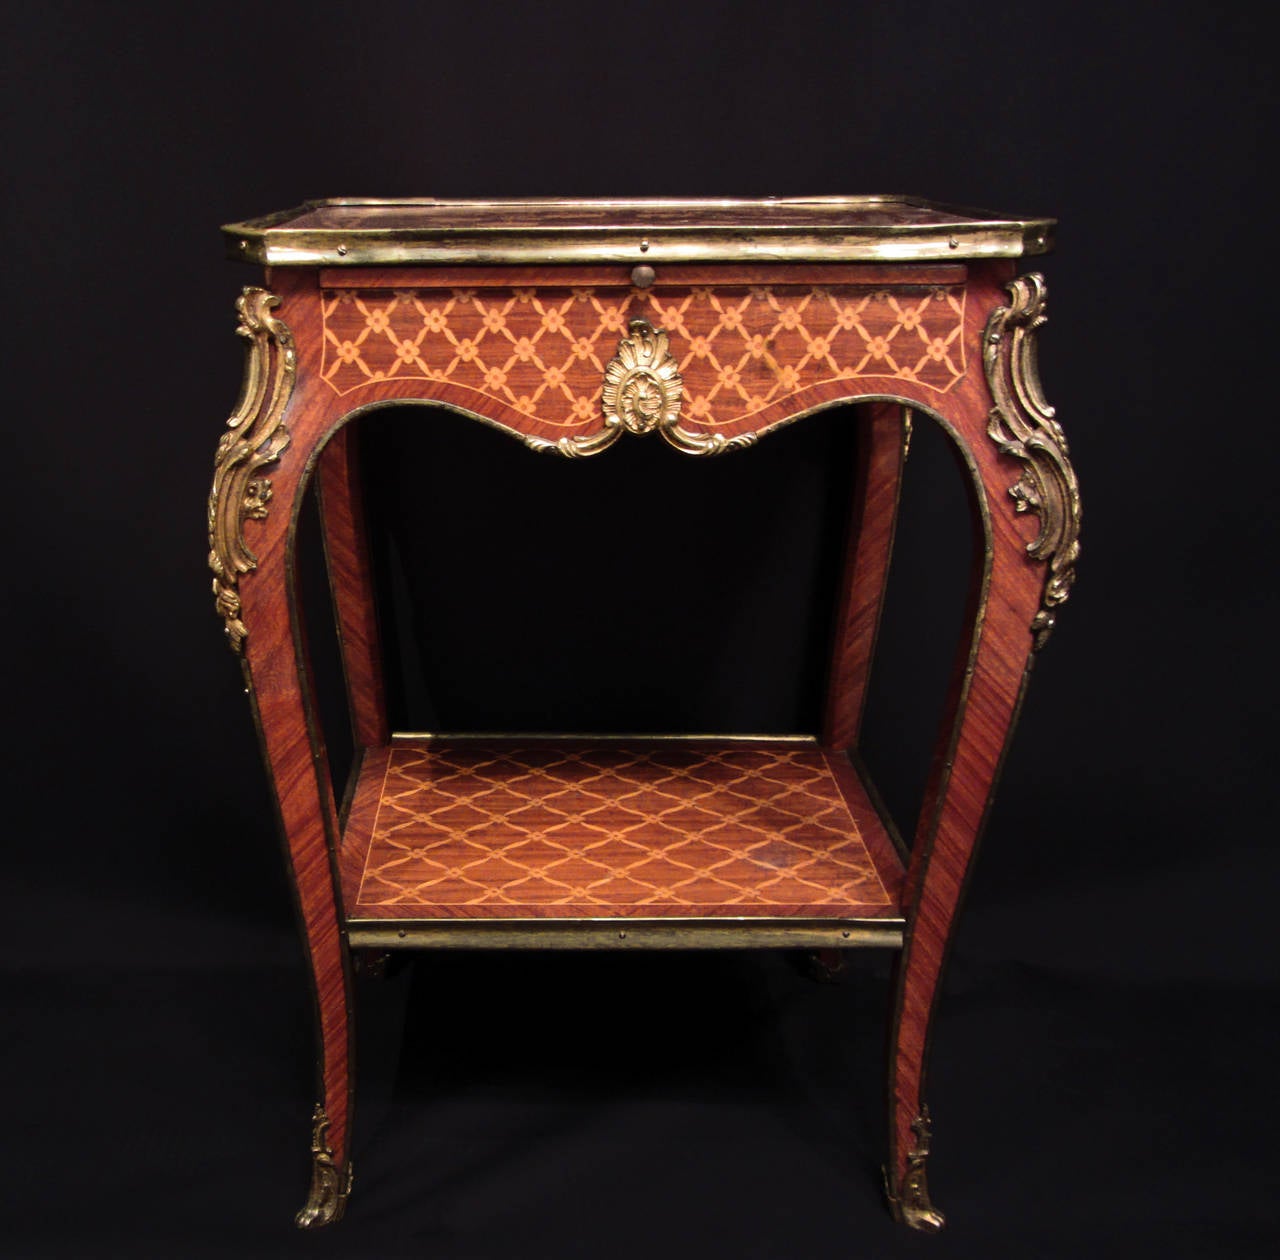 A pair of French salon tables with marquetry inlay tops and shelf, decorative ormolu mounts and feet on cabriole legs and a sliding top draw. Stamped with J Sargues. 

French, late 19th century. 

Measures: Width 48 cm, height 72 cm, depth 38 cm.